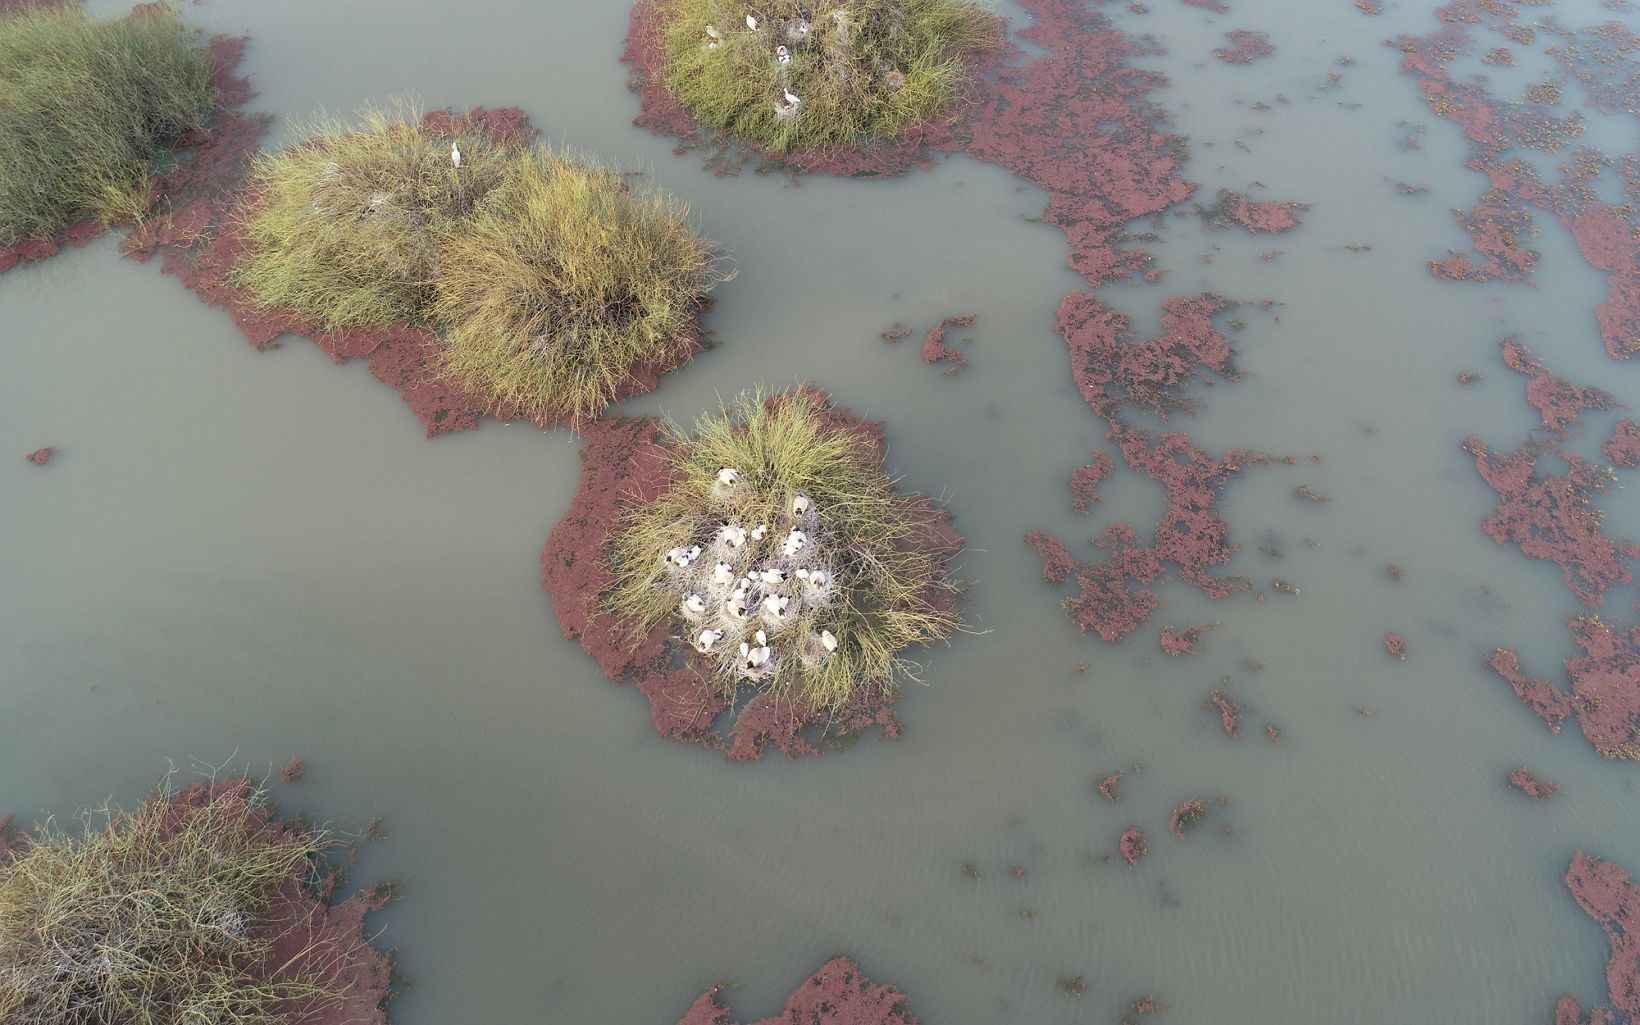 Australian White Ibis breeding colonies at Gayini from above © Vince Bucello/Midstate Video Productions